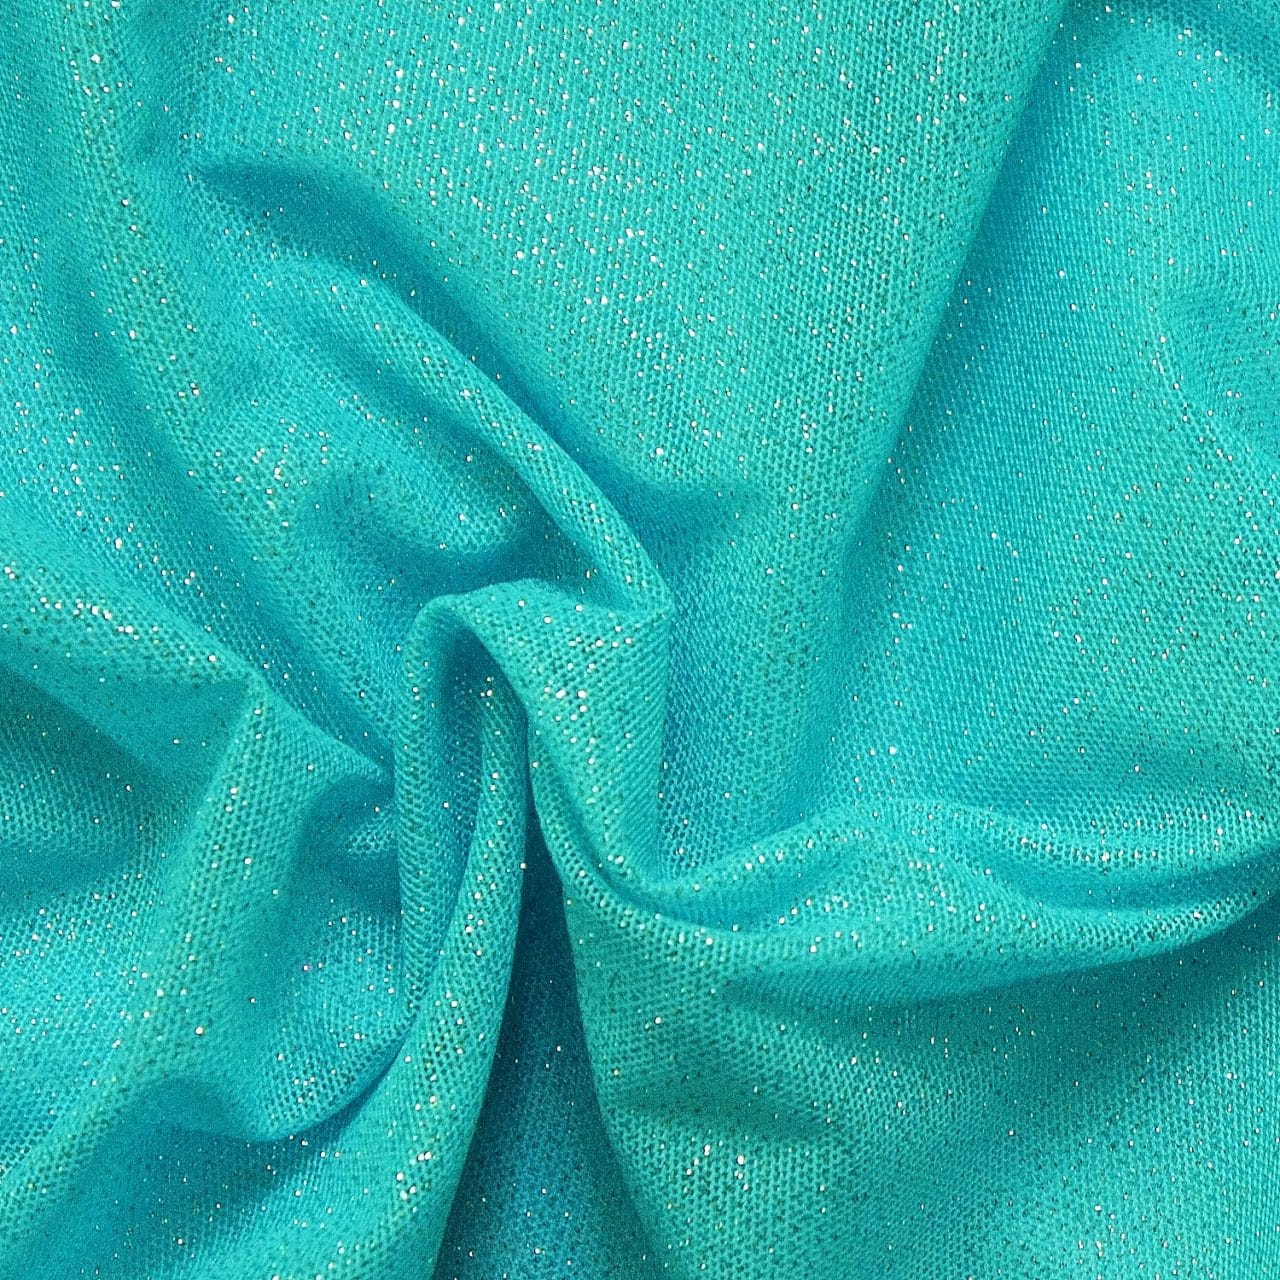 Turquoise Glitter Mesh fabric features all over turquoise glitter on 2-way stretch turquoise polyester mesh making it ideal for both semi-fitted and draped garments.